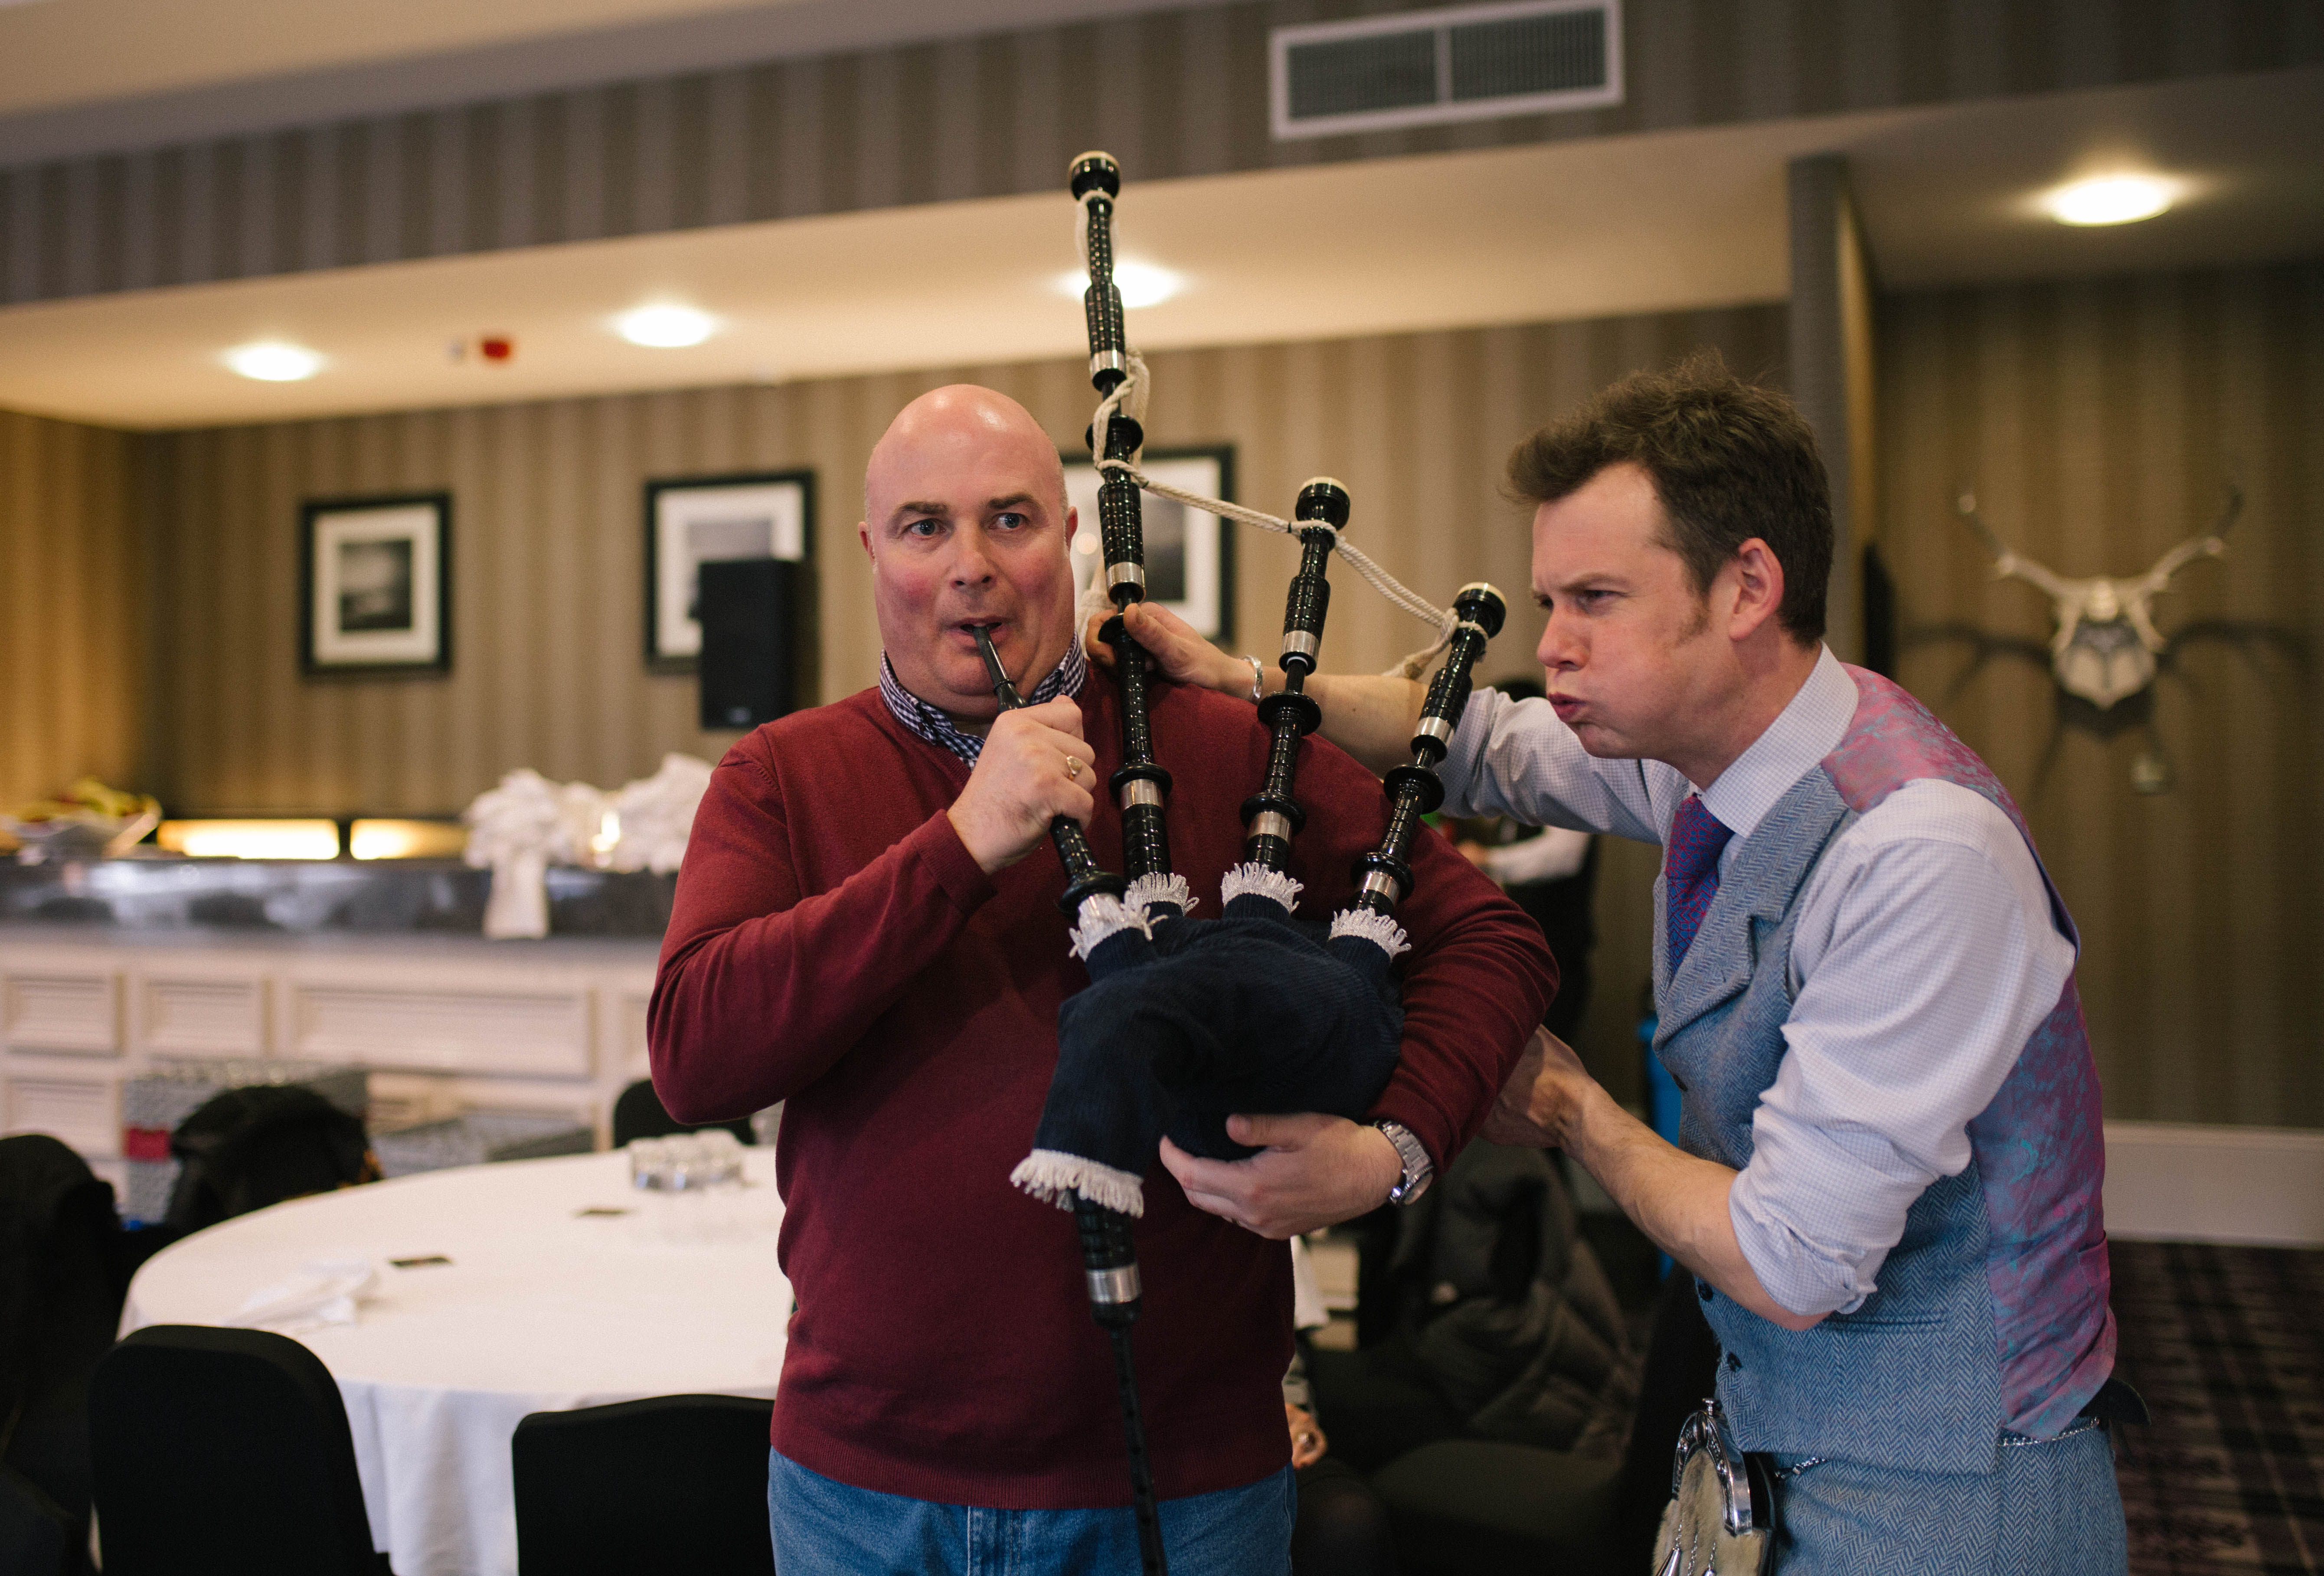 Bagpipe lesson - Reel Time Events